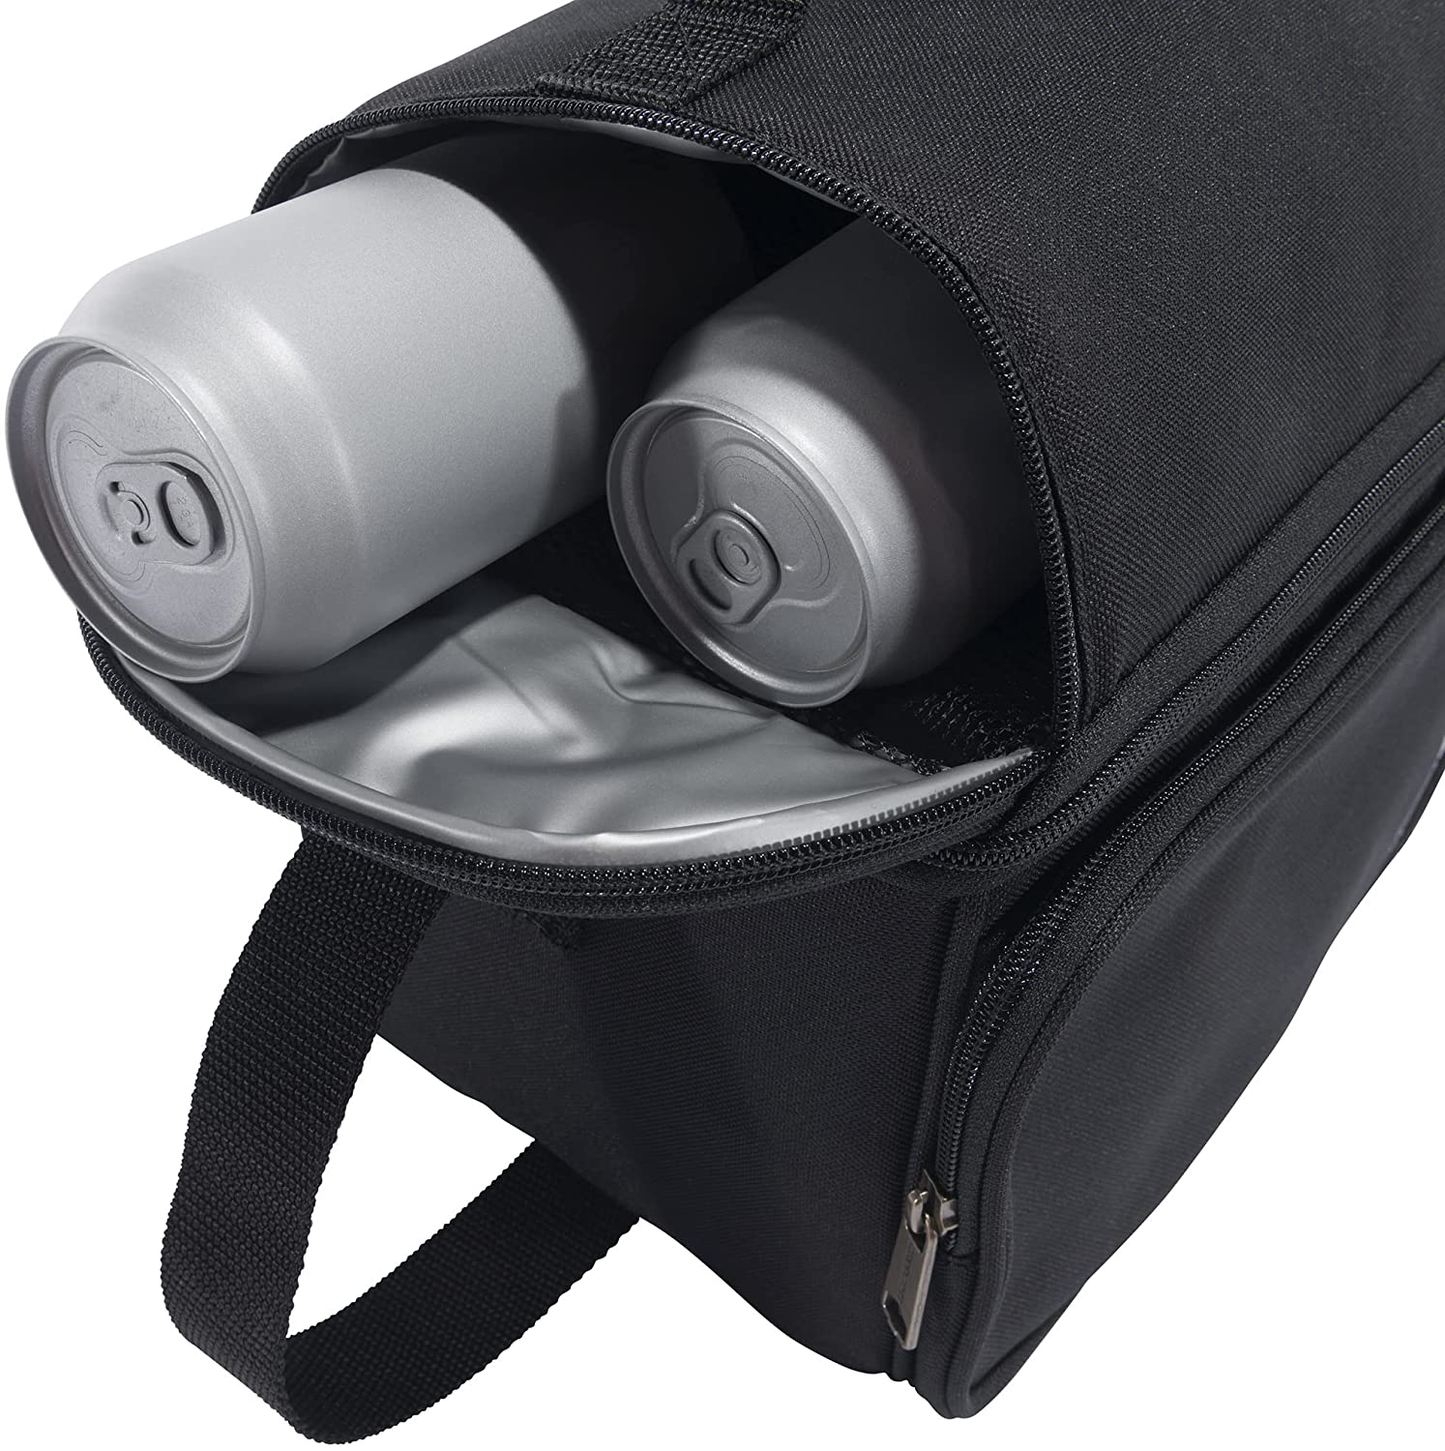 Deluxe Dual Compartment Insulated Lunch Cooler Bag, Black